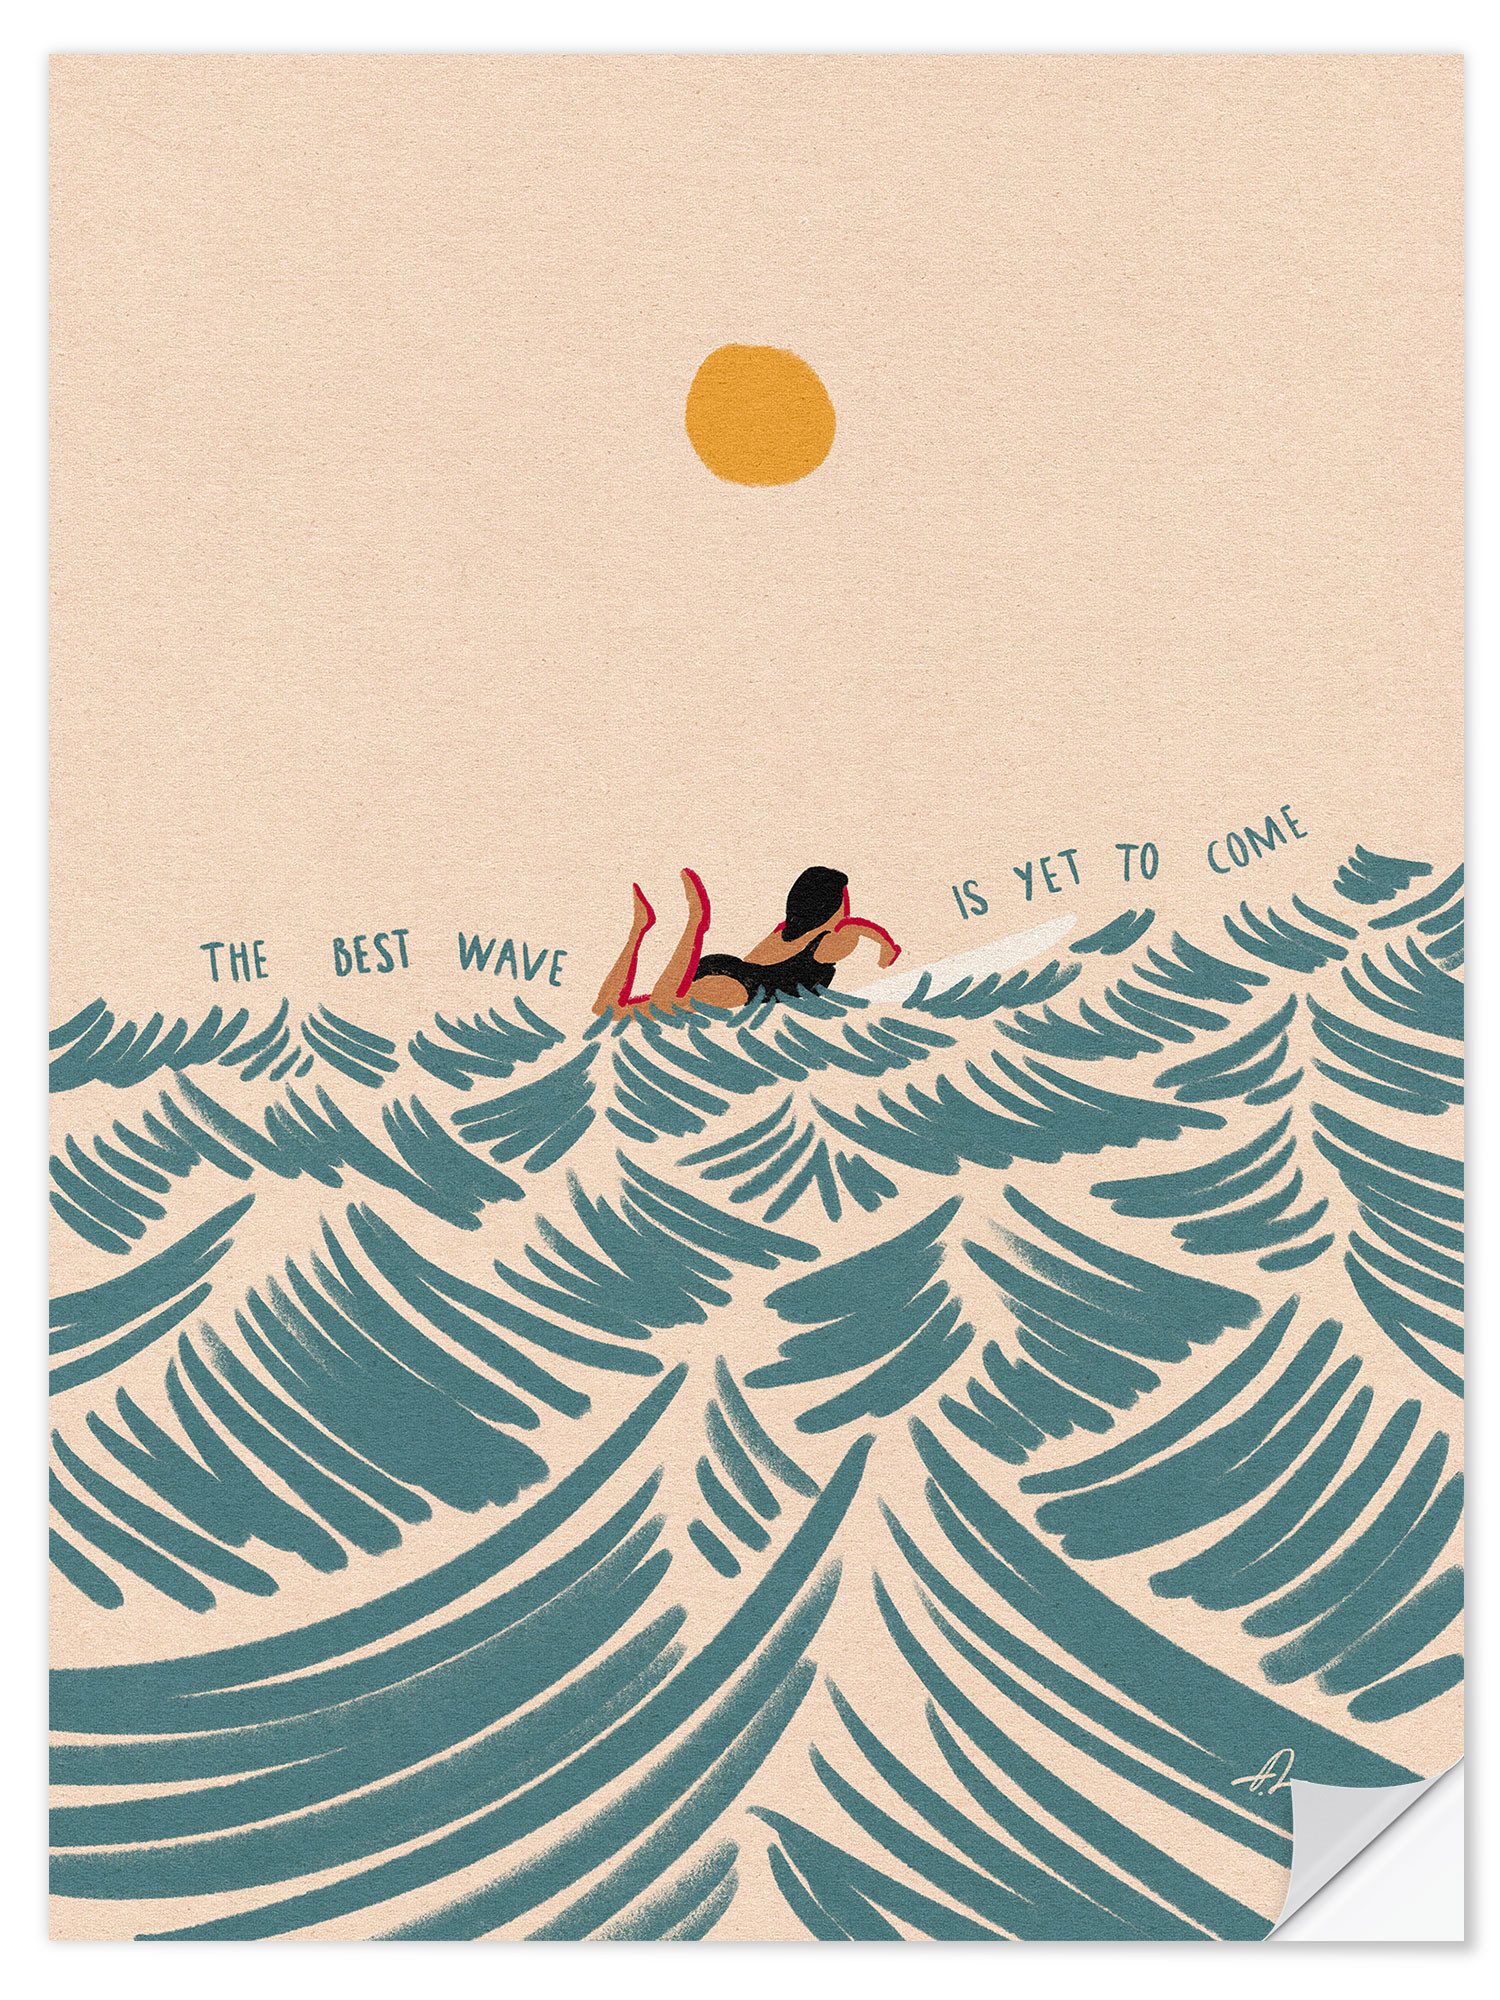 Posterlounge Wandfolie Fabian Lavater, The Best Wave Is Yet to Come, Badezimmer Illustration